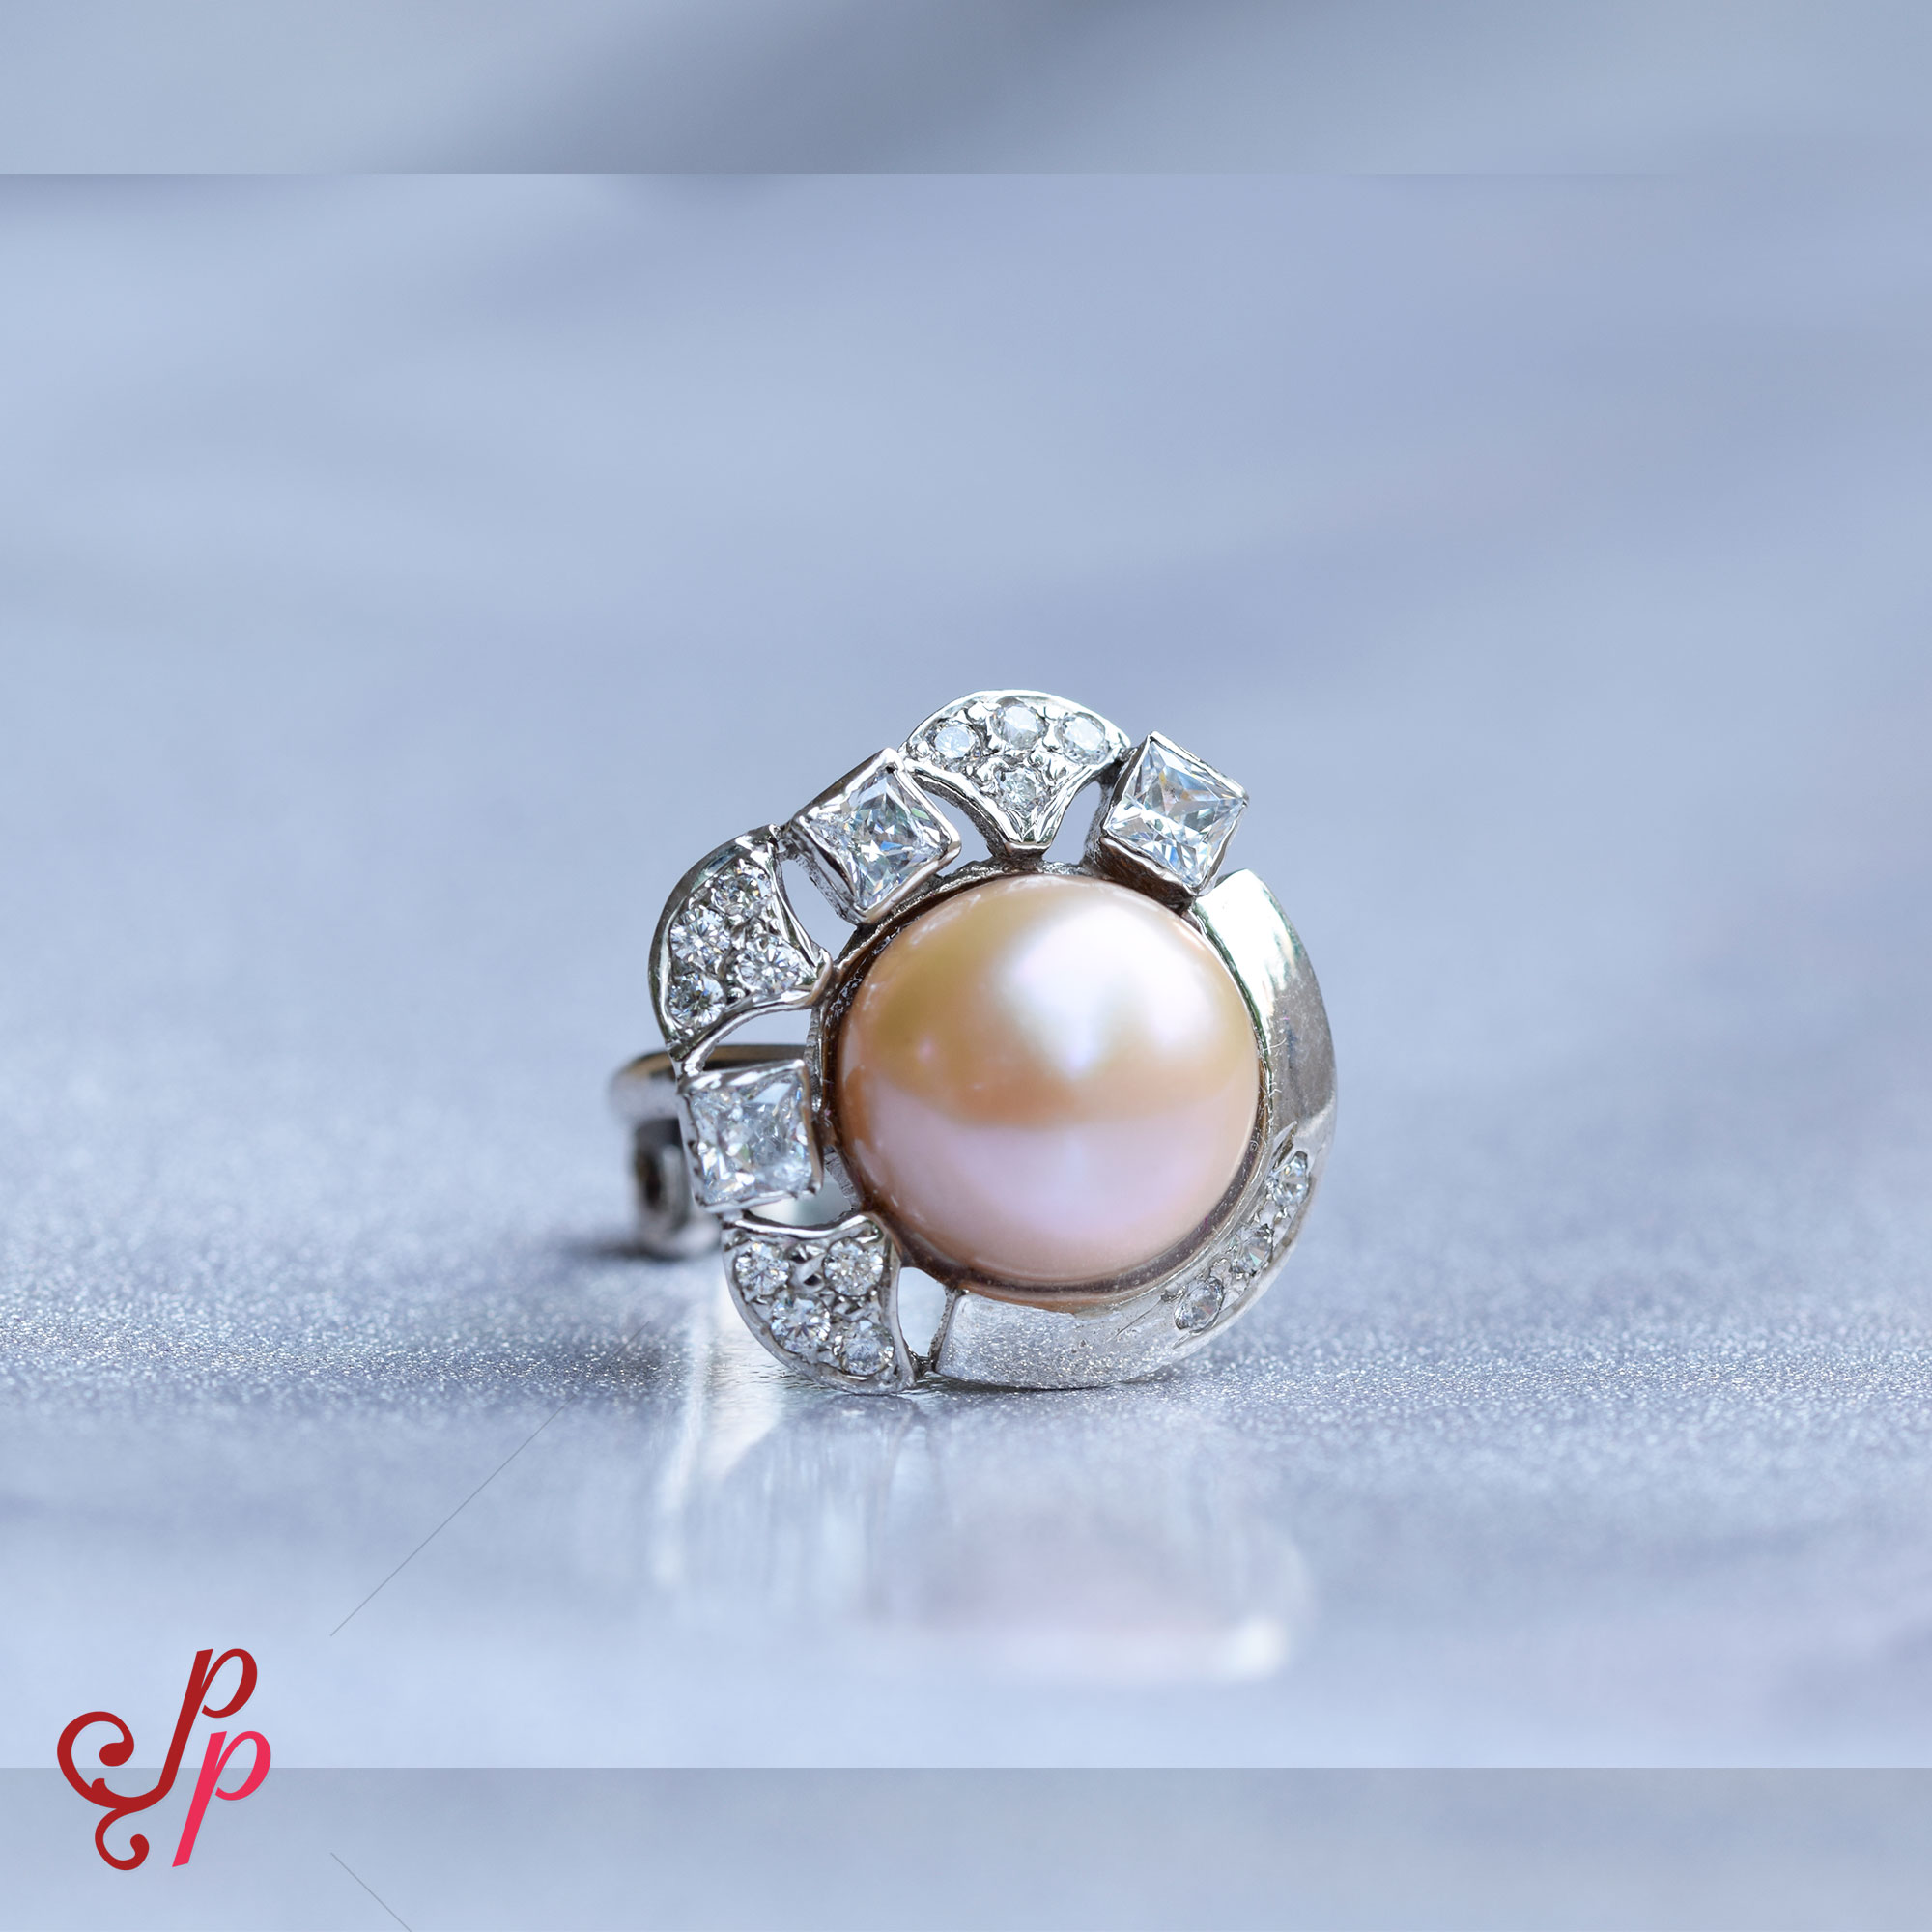 Beautiful Pink Pearl Finger Ring in 925 Sterling Silver - Adjustable